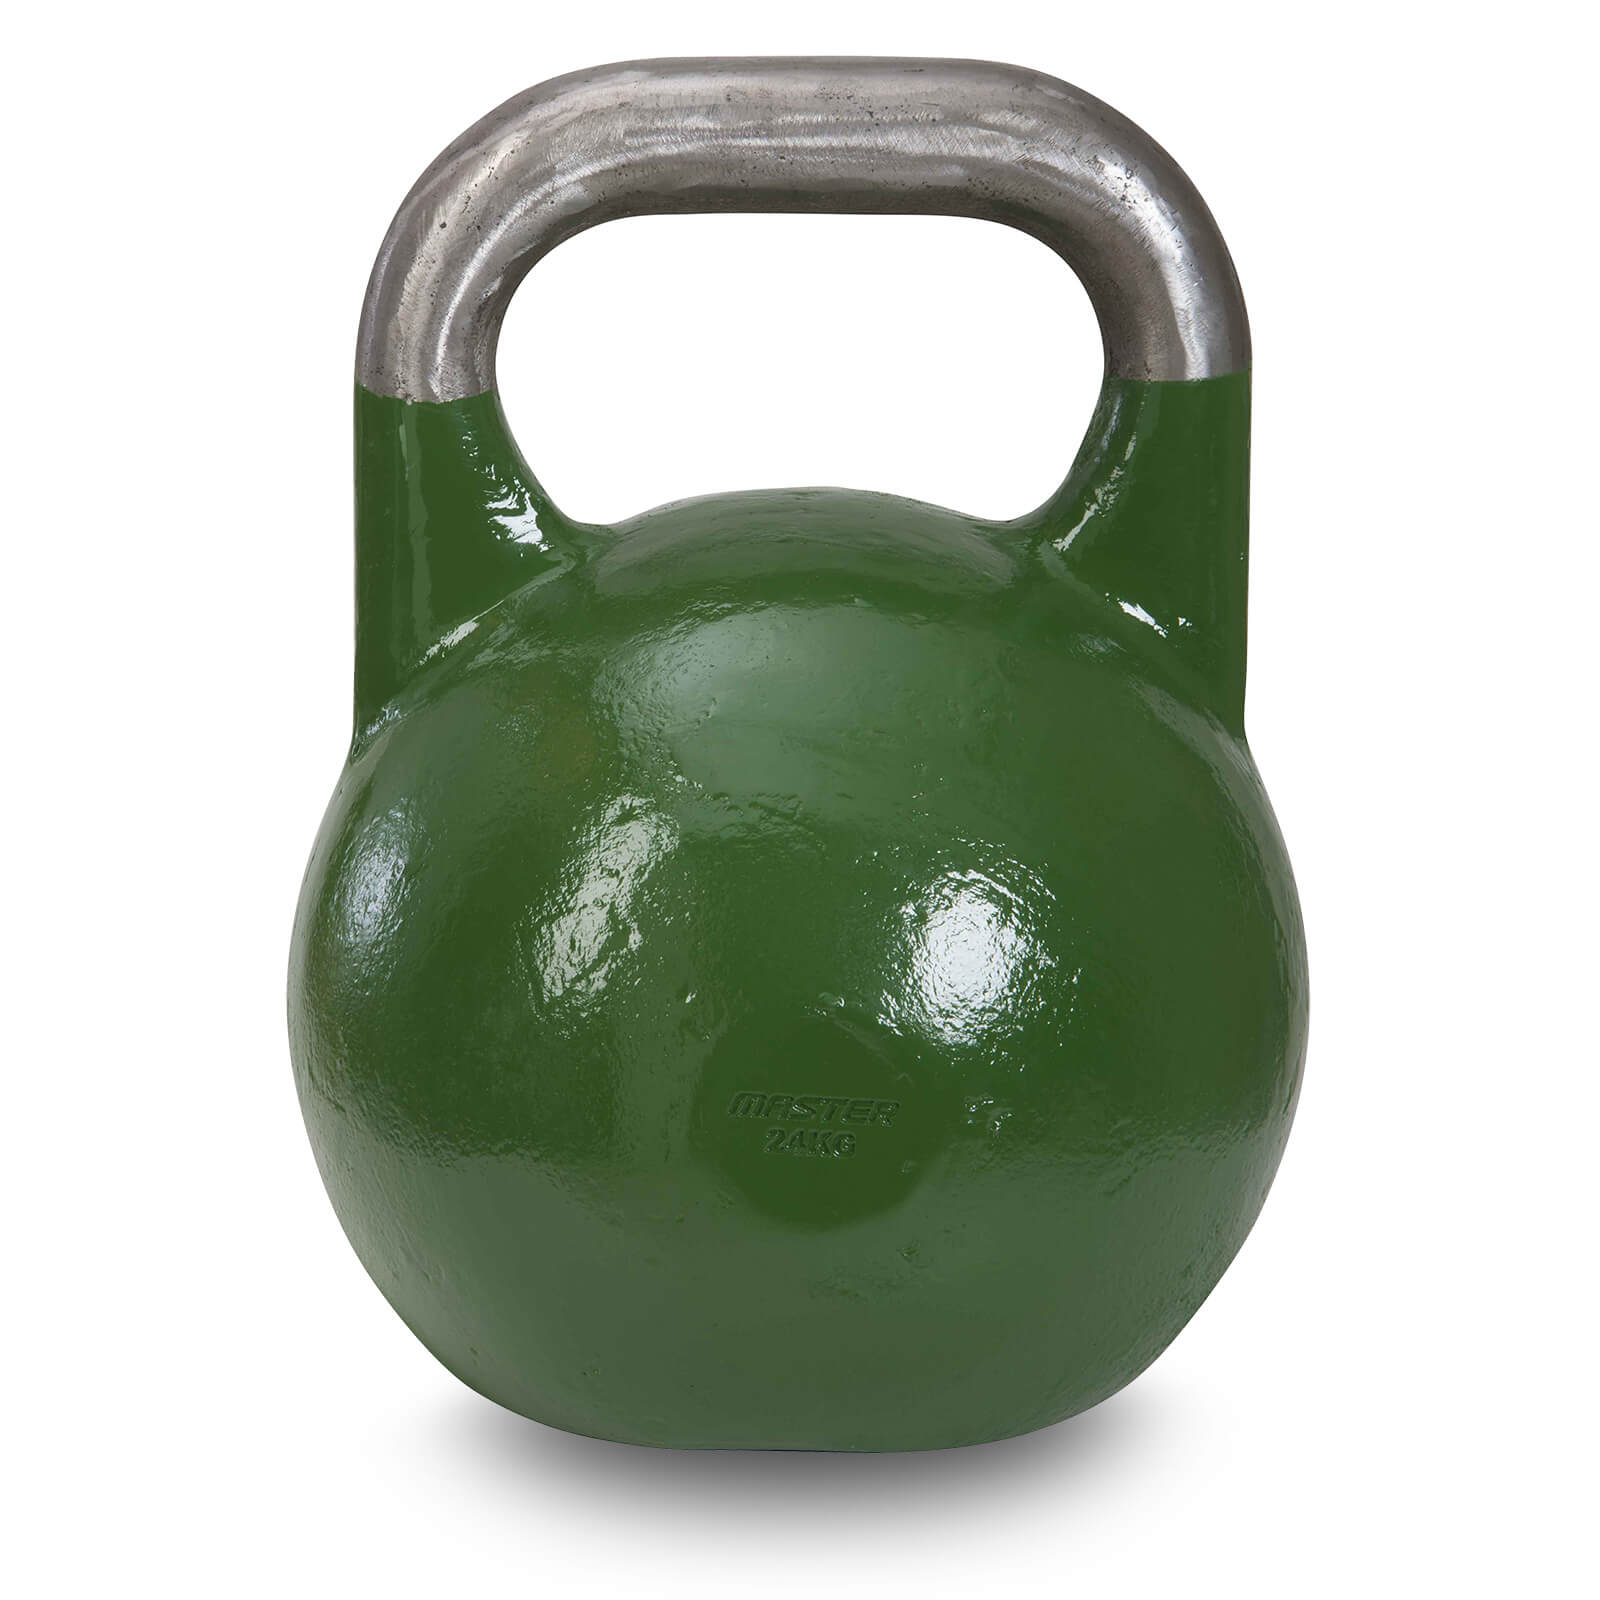 Competition kettlebell, 24 kg